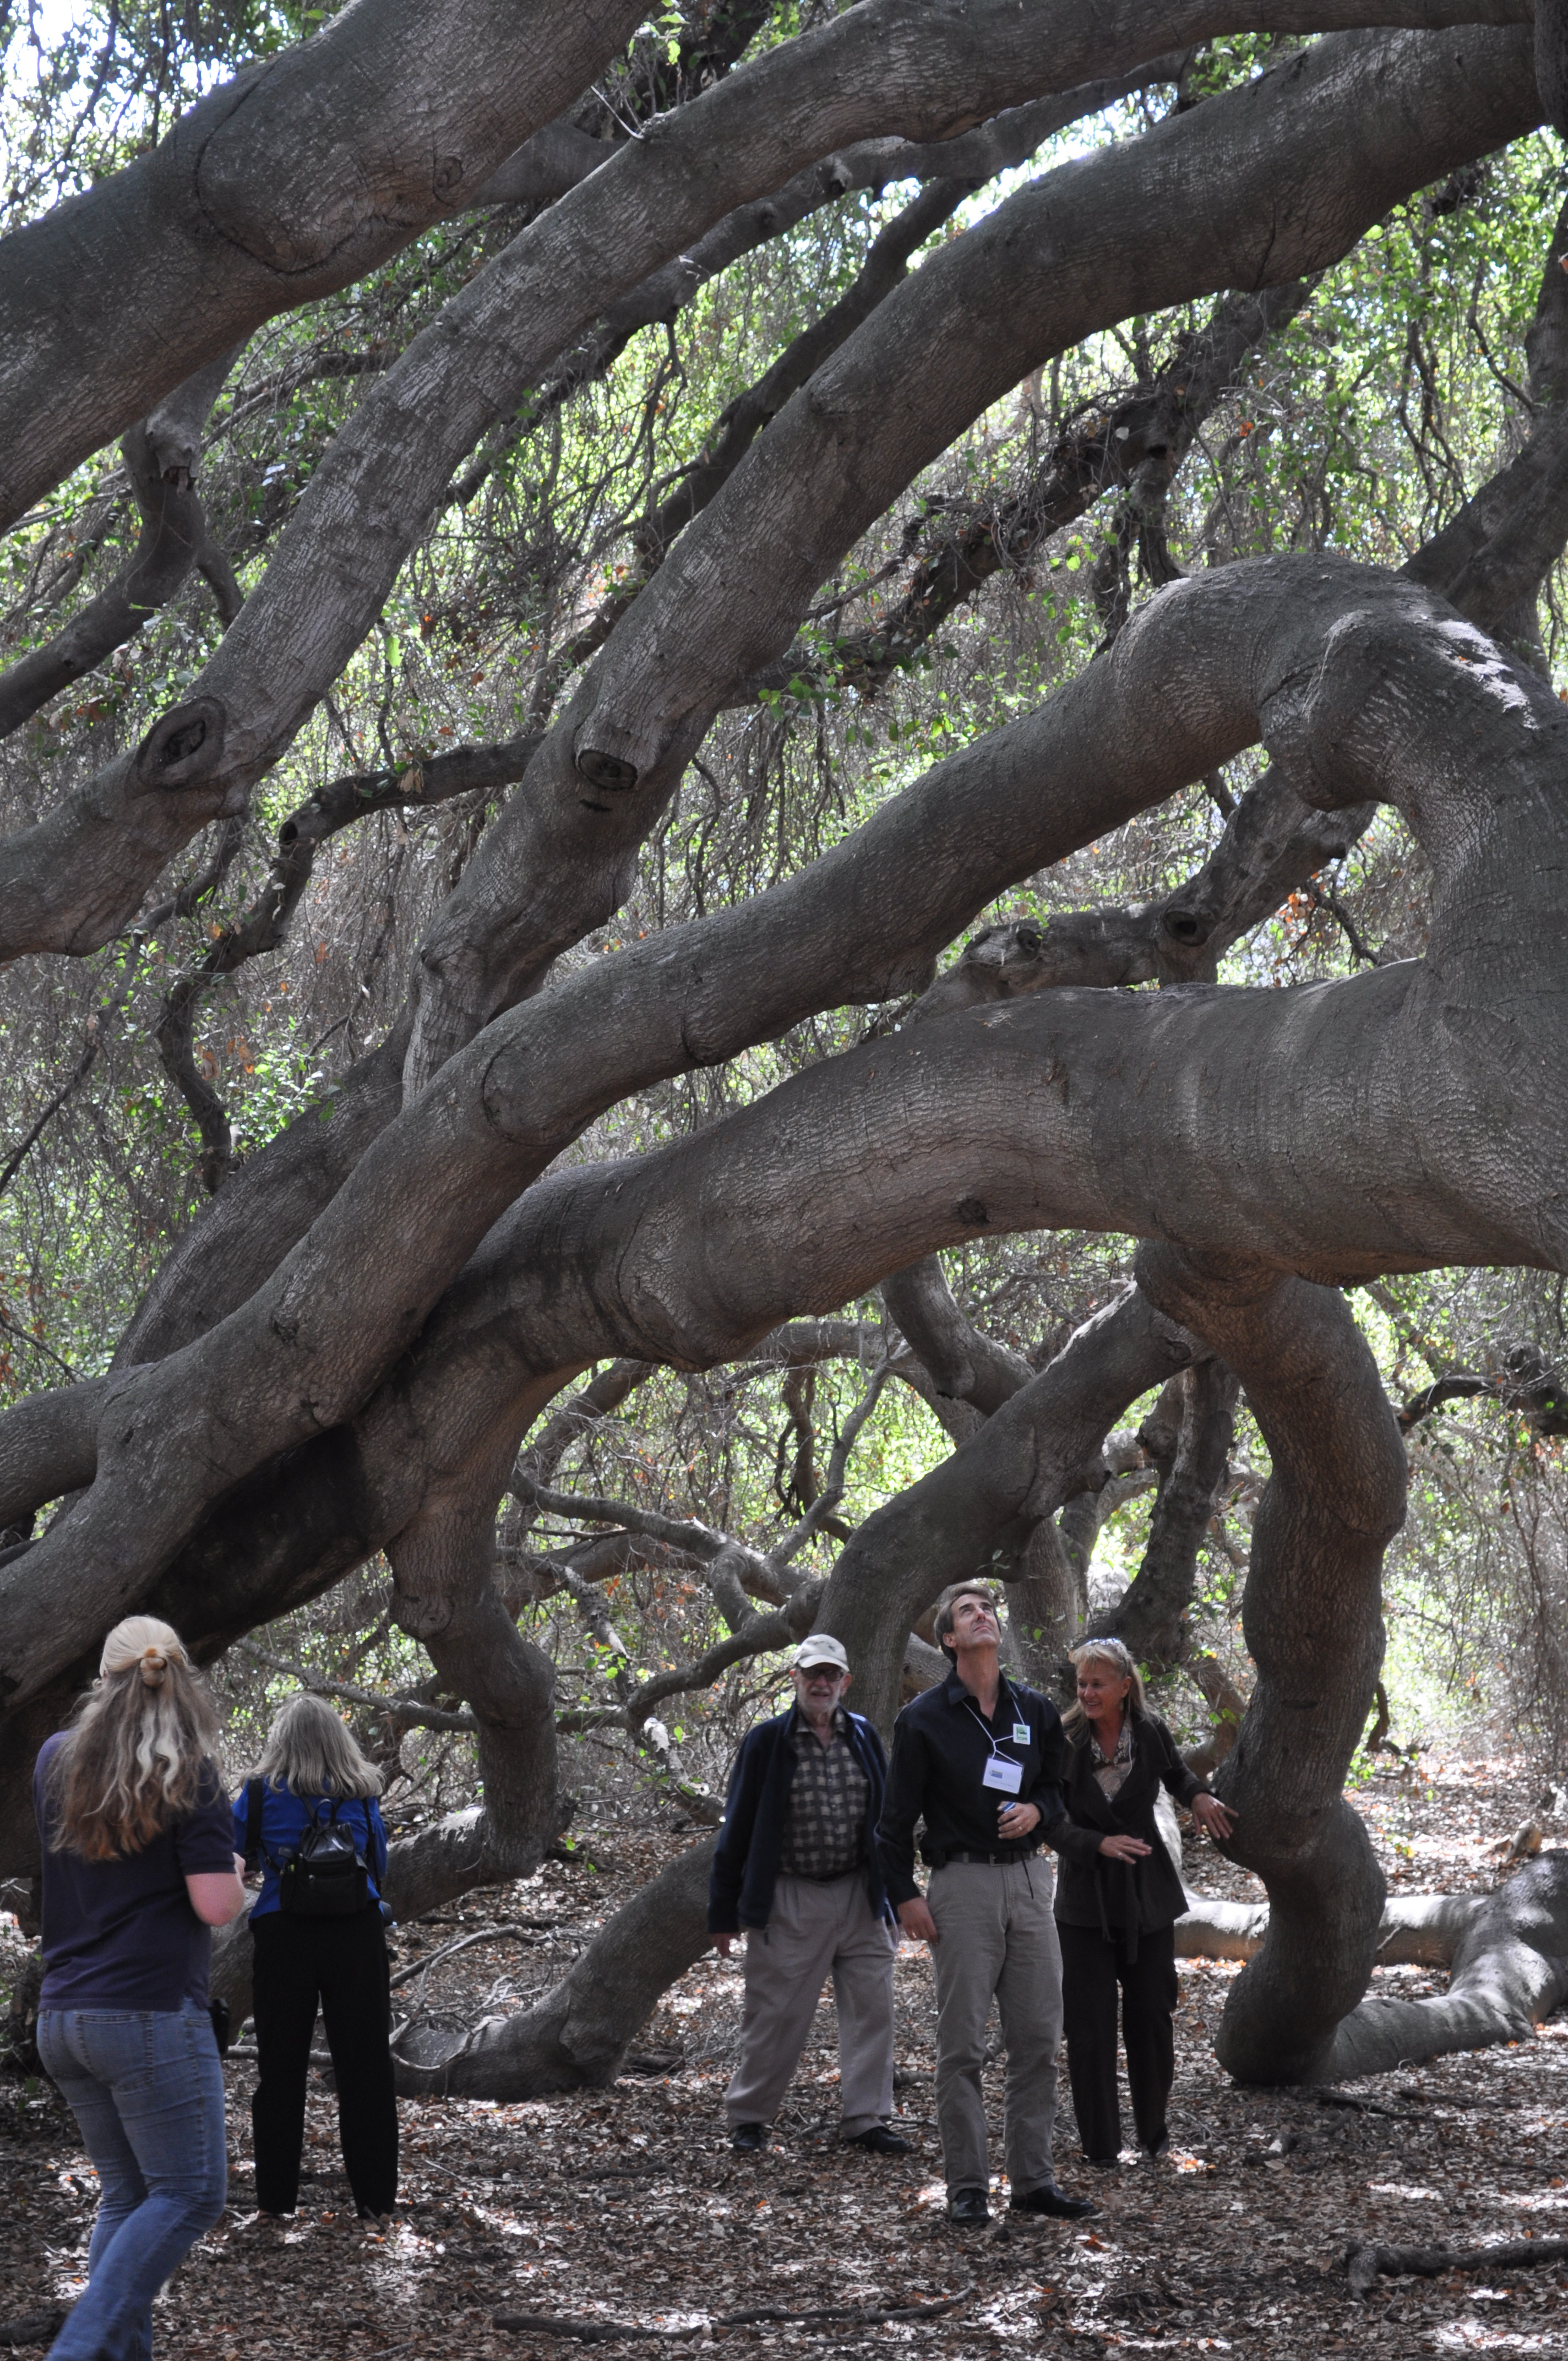 The wonder of the Pechanga reservation's great oak captivate the group.